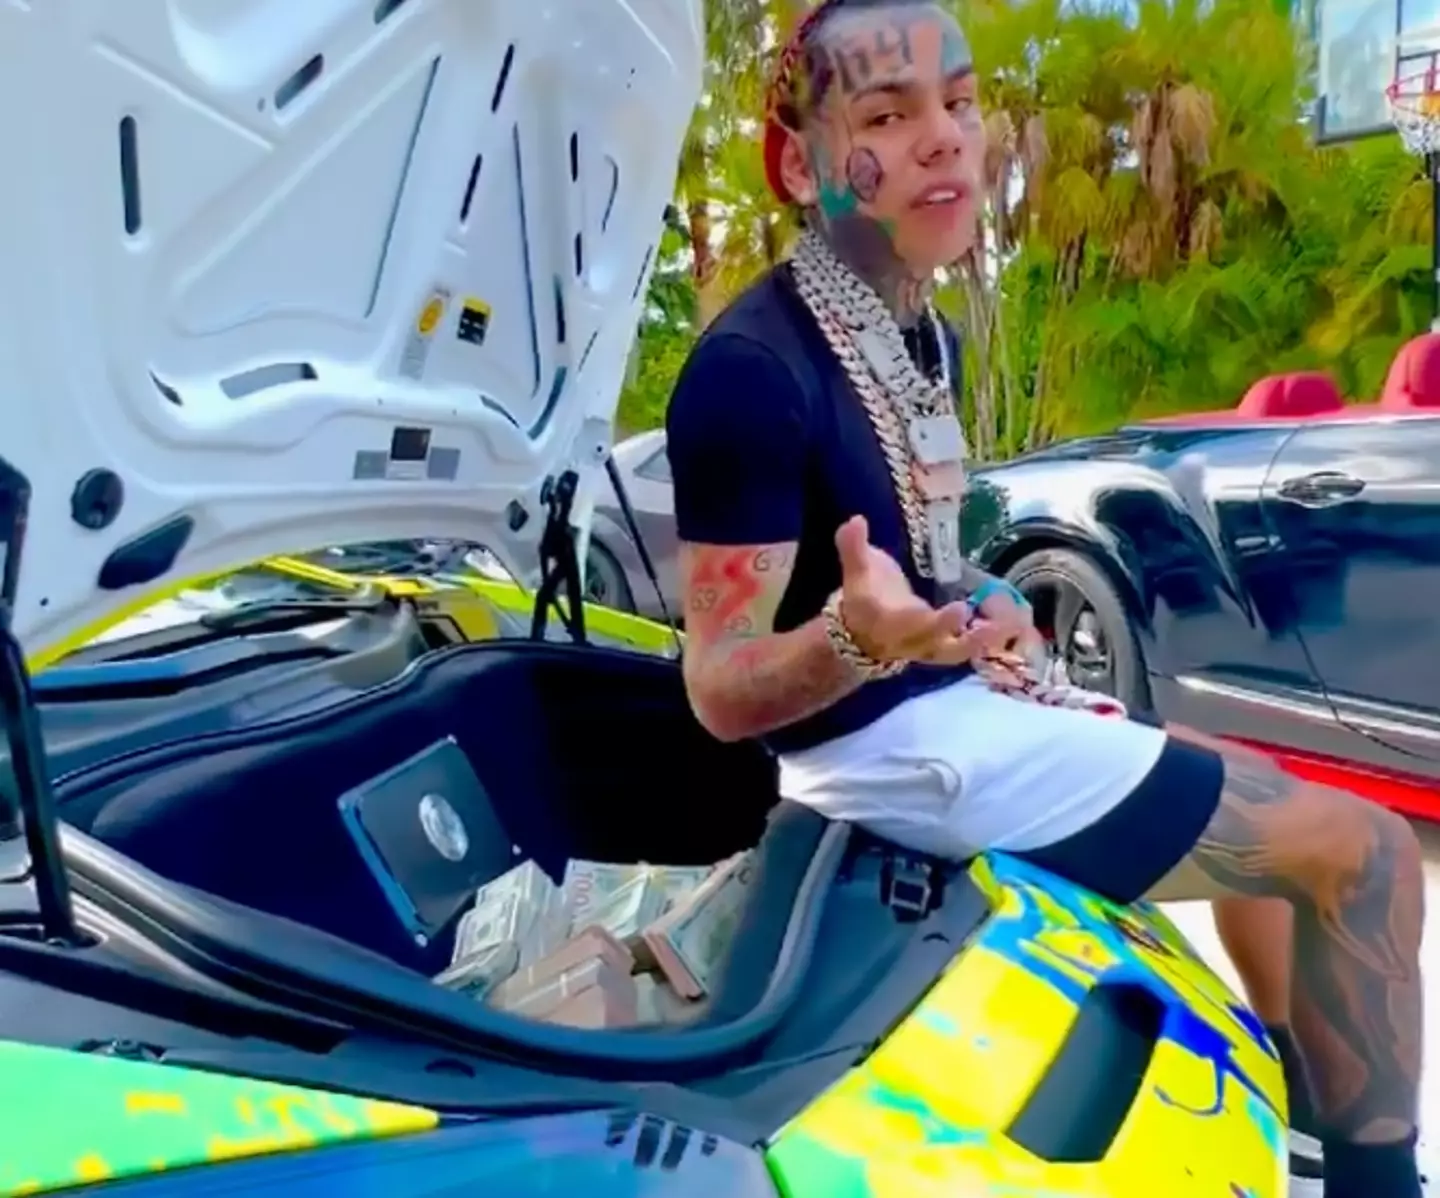 6ix9ine counts out his physical money for his followers while also promoting his new music video.